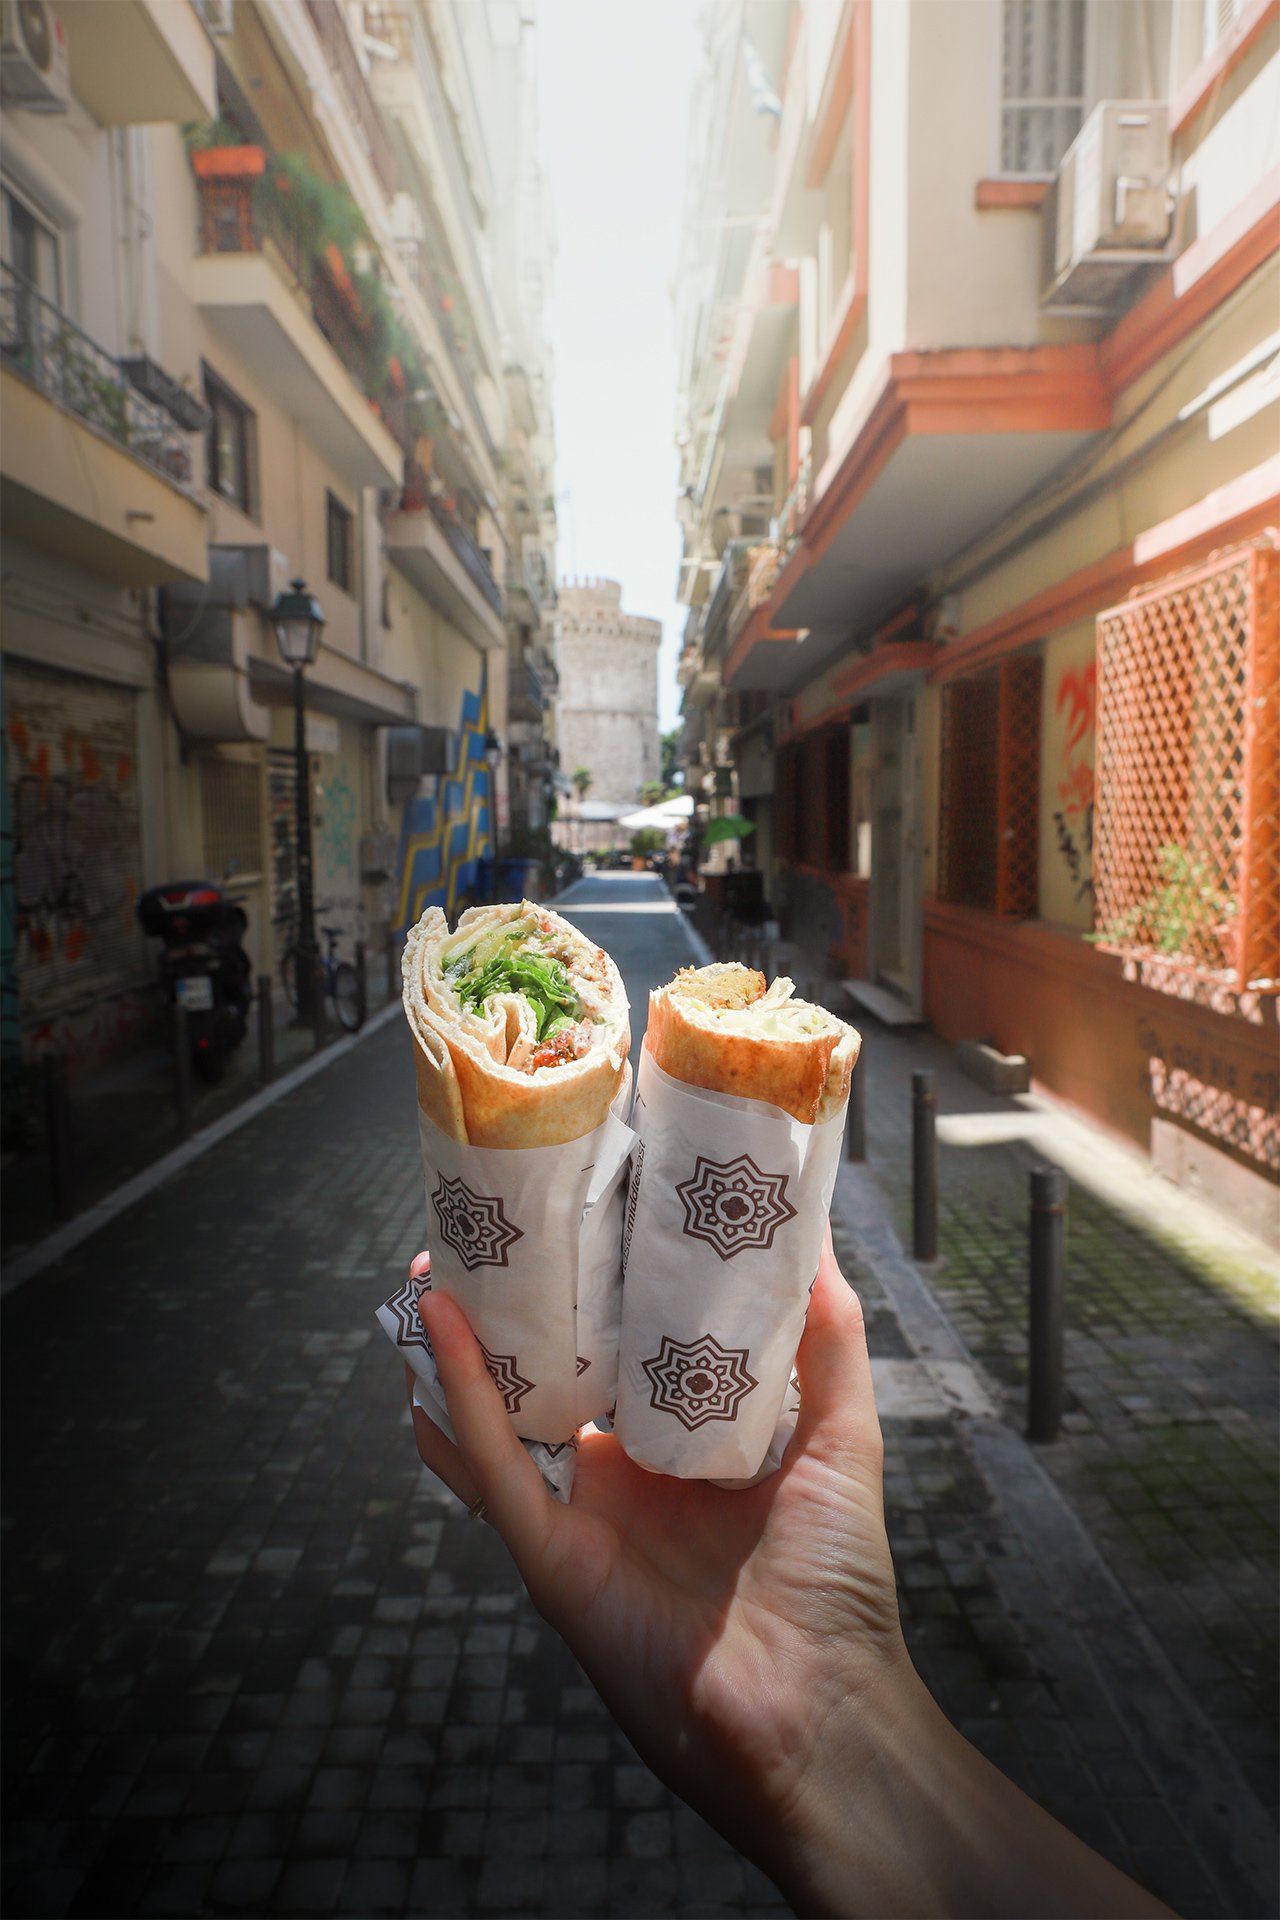 There is a variety of street food options in Thessaloniki